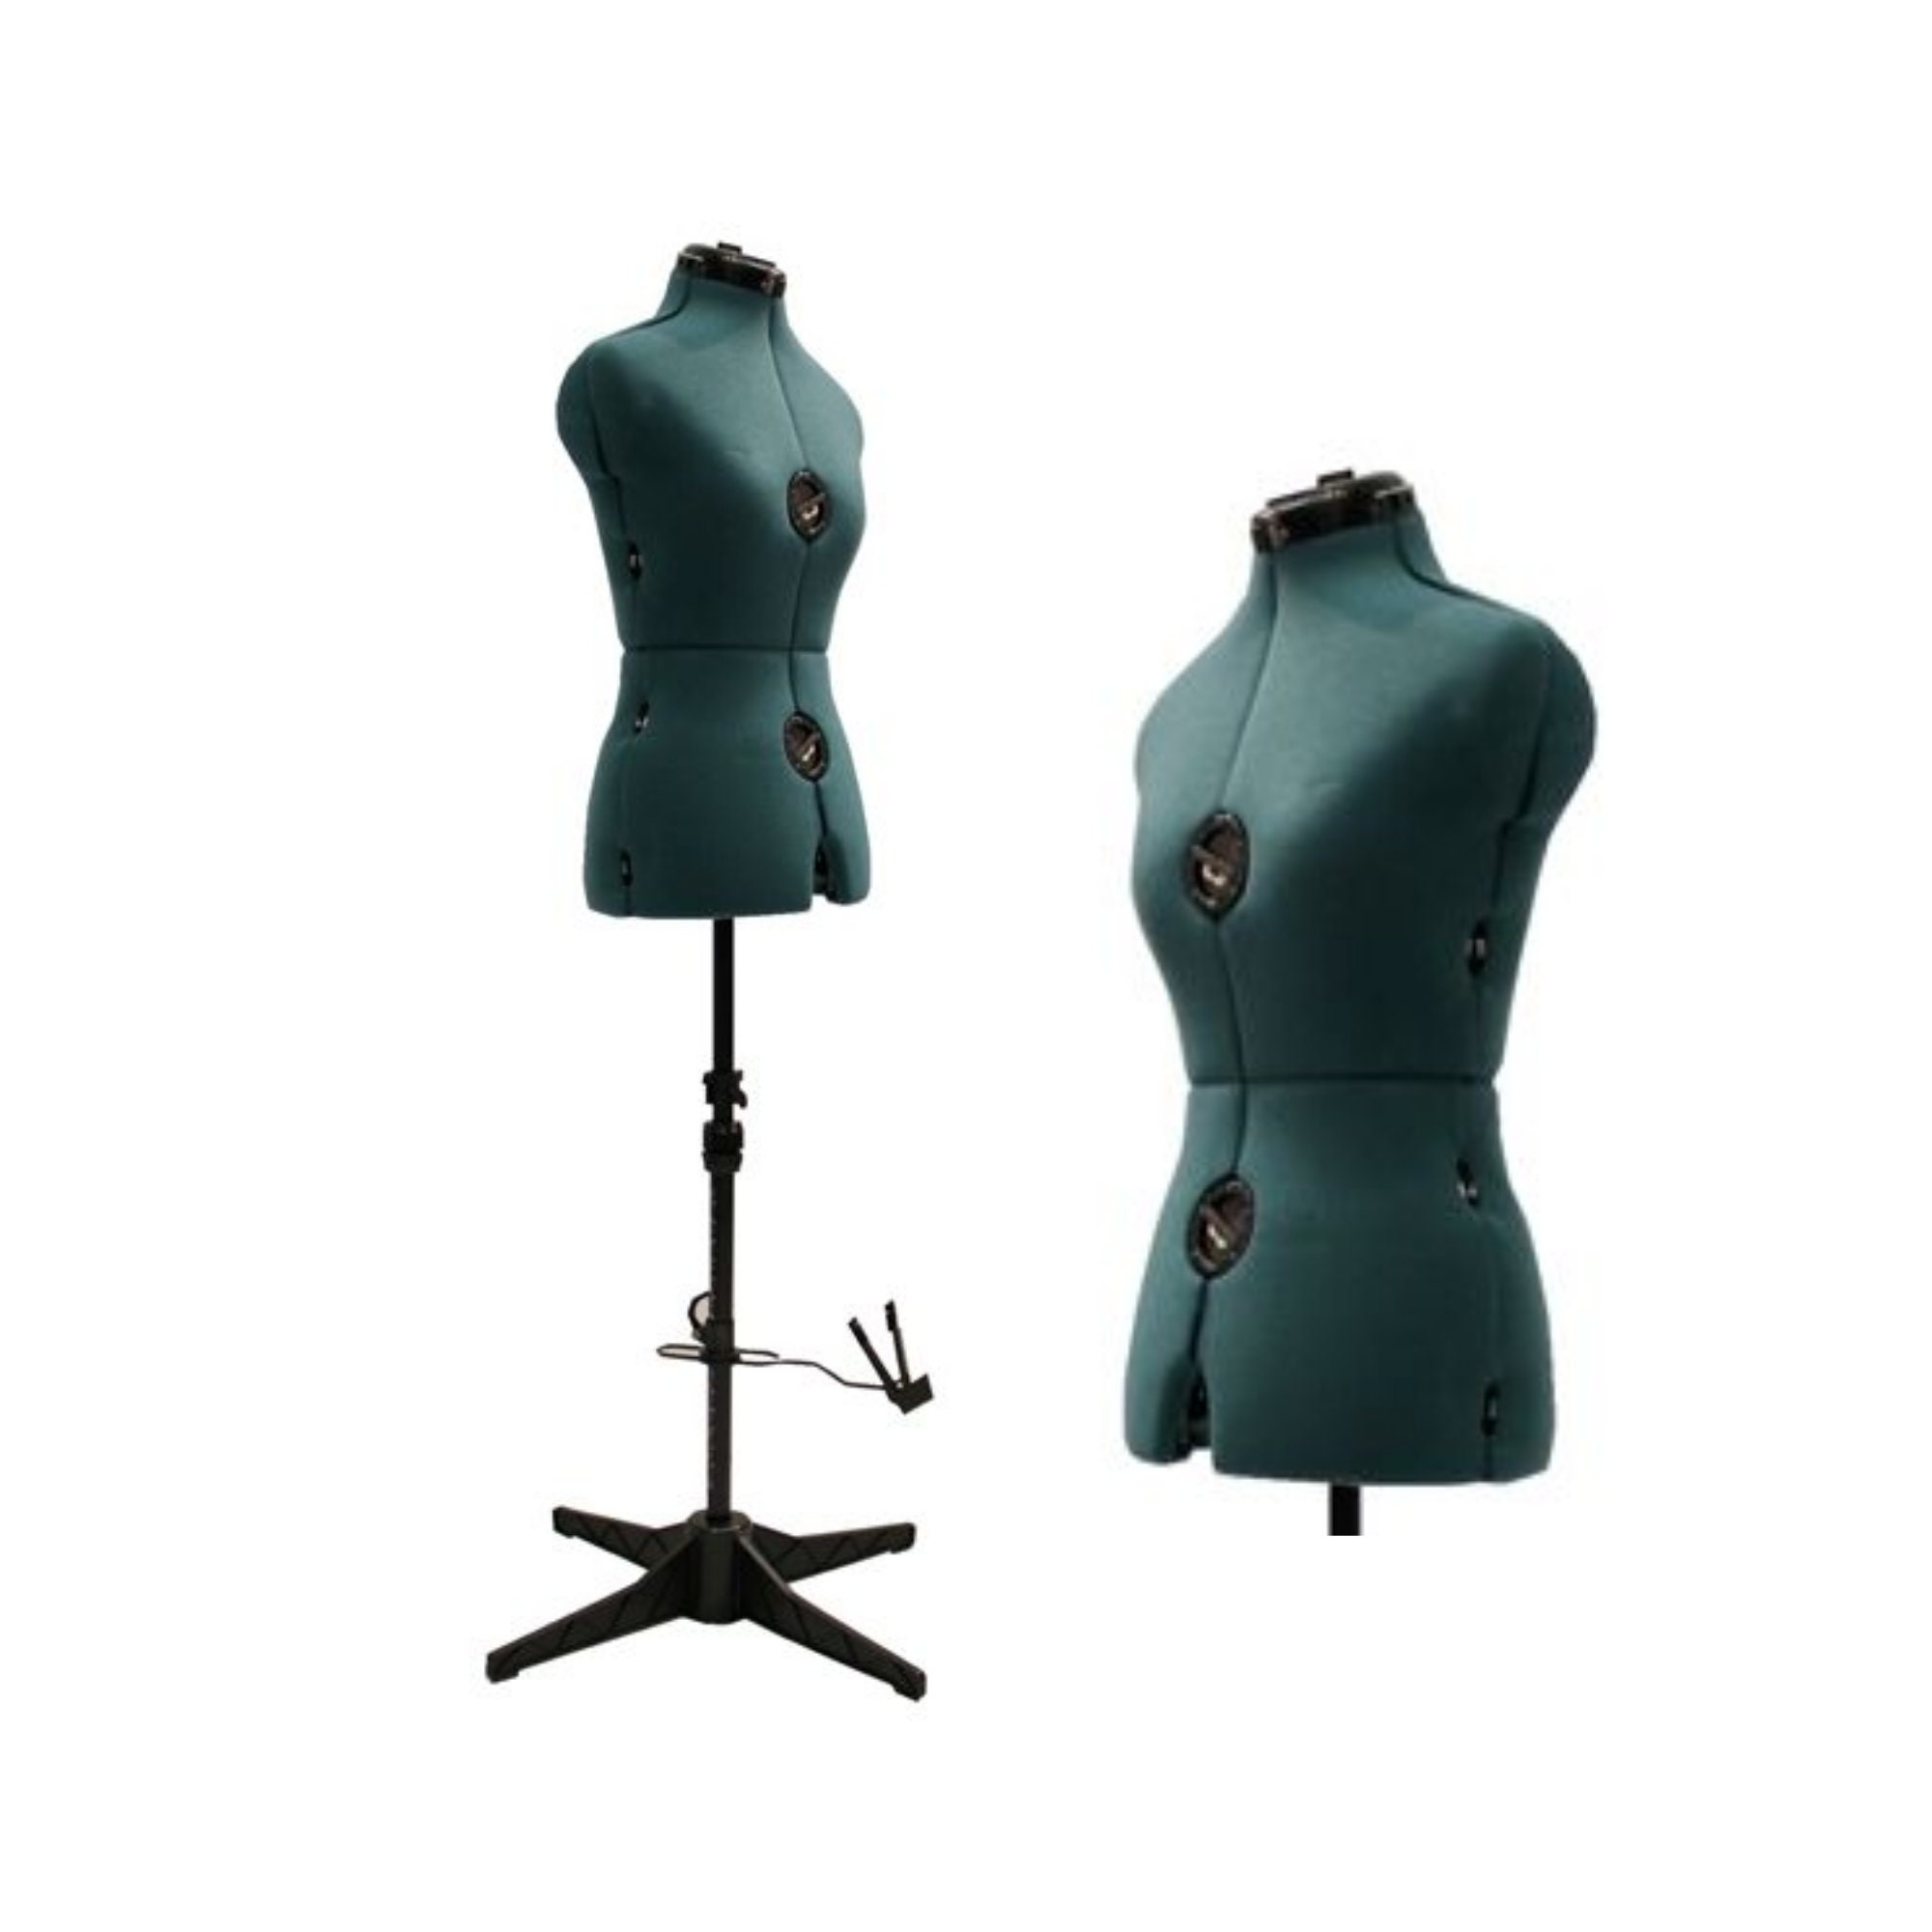 ZAQYCM Manikin Dress Form Female with Wheels, Dressmaker Mannequin  Adjustable Large for Sewing Clothes/Jackets/Blouses/T-Shirts/Form Garments